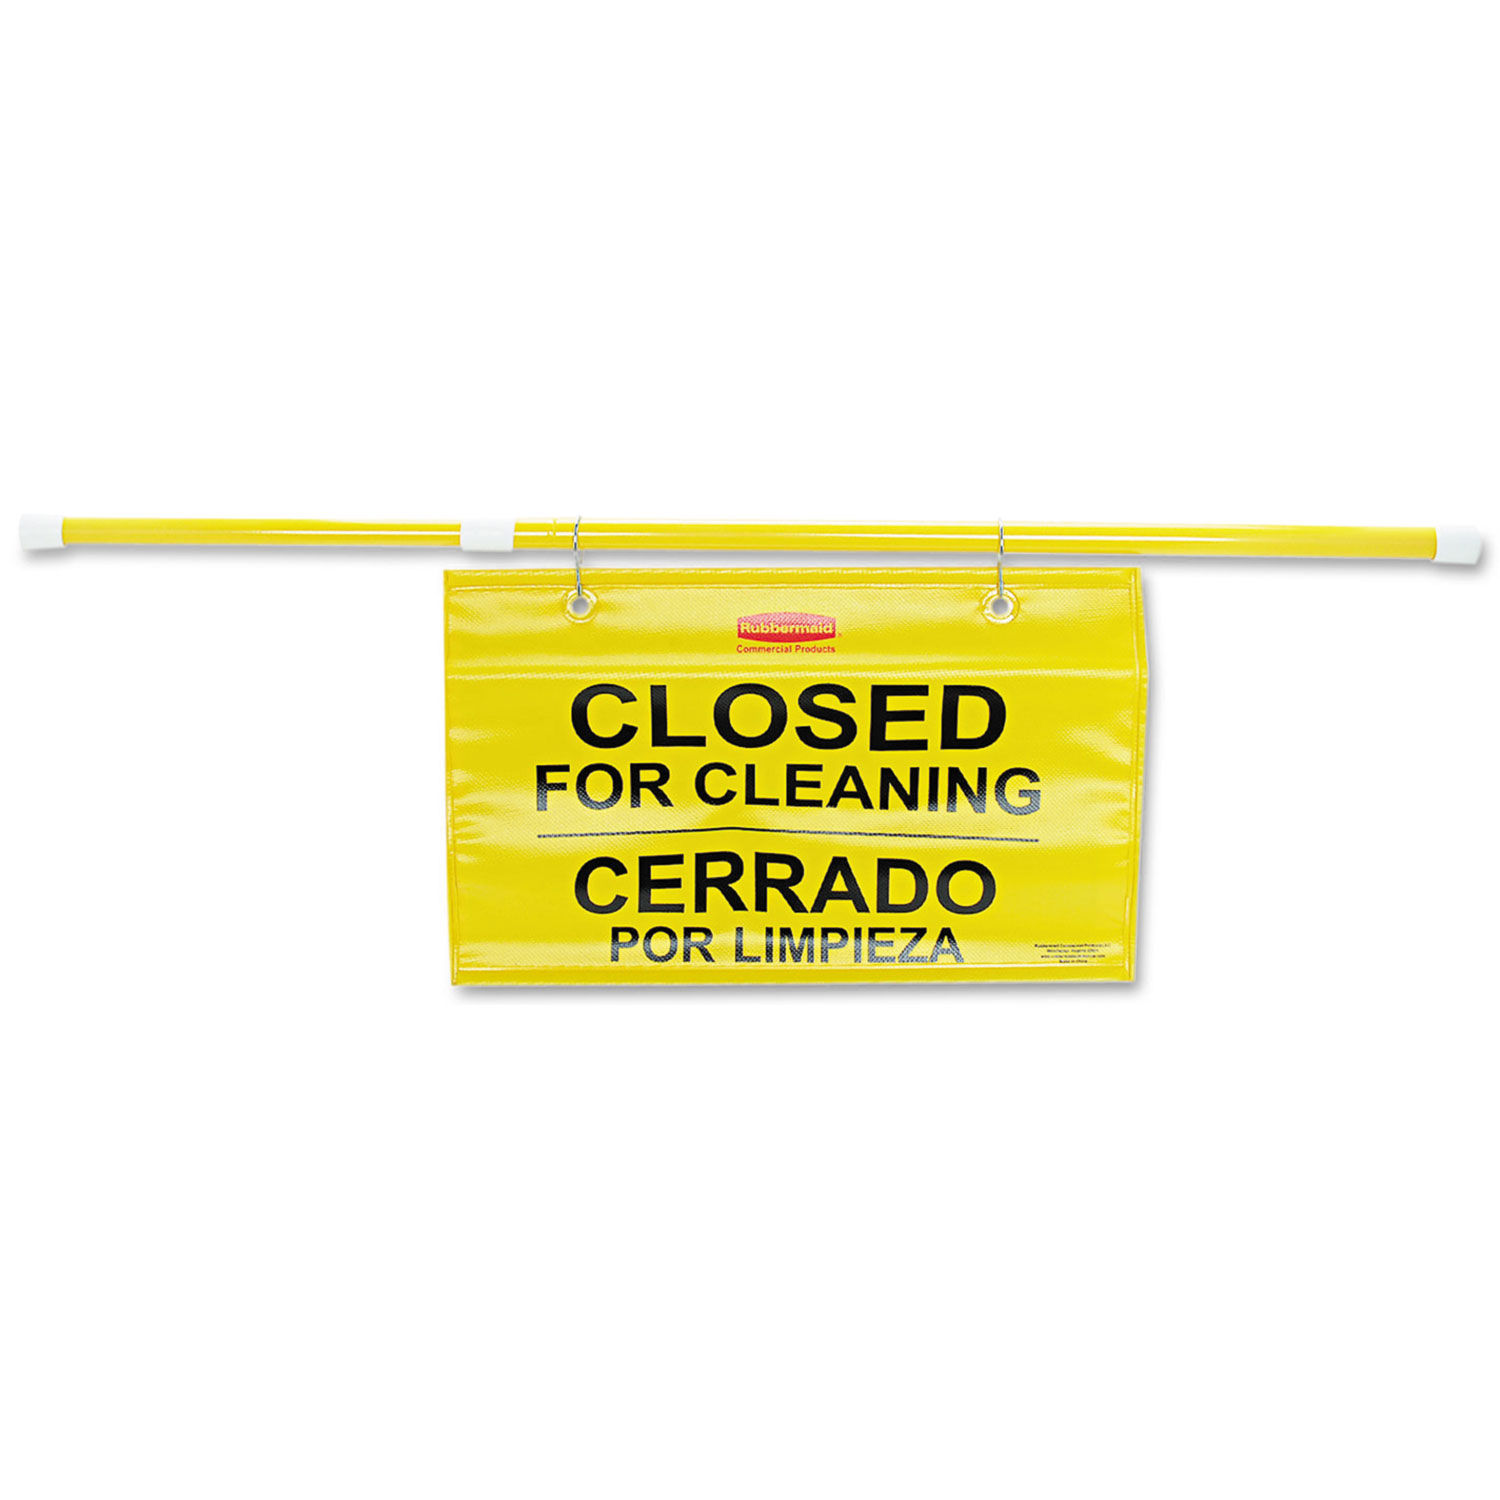 Site Safety Hanging Sign 50 x 1 x 13, Multi-Lingual, Yellow